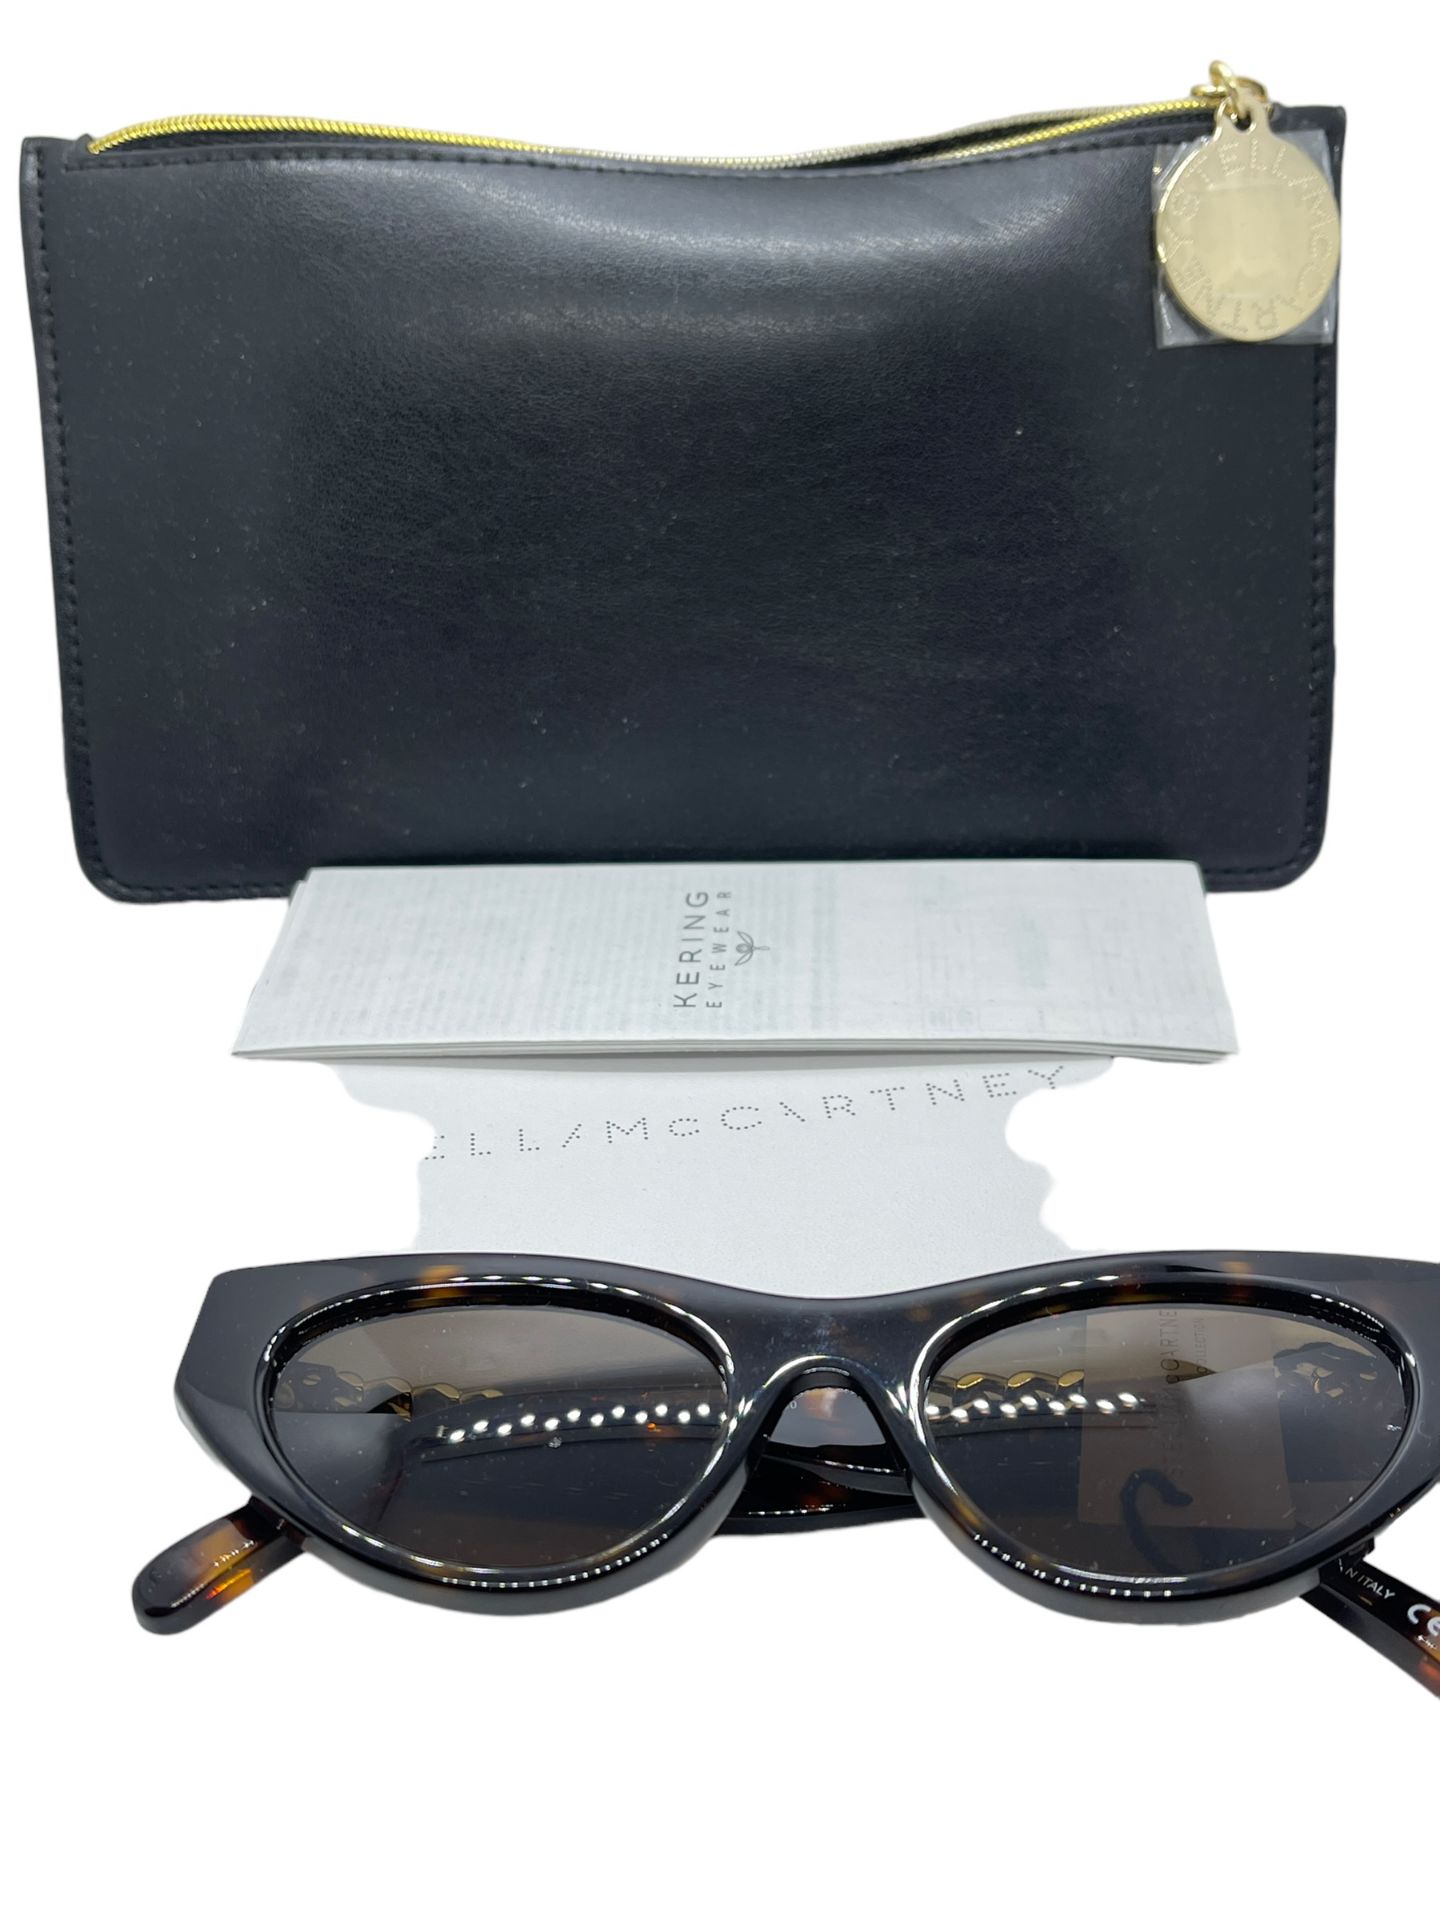 STELLA LLA. MARCARTNEY DESIGNER SUNGLASSES FROM A PRIVATE JET CHARTER. XDEMO - Image 5 of 6